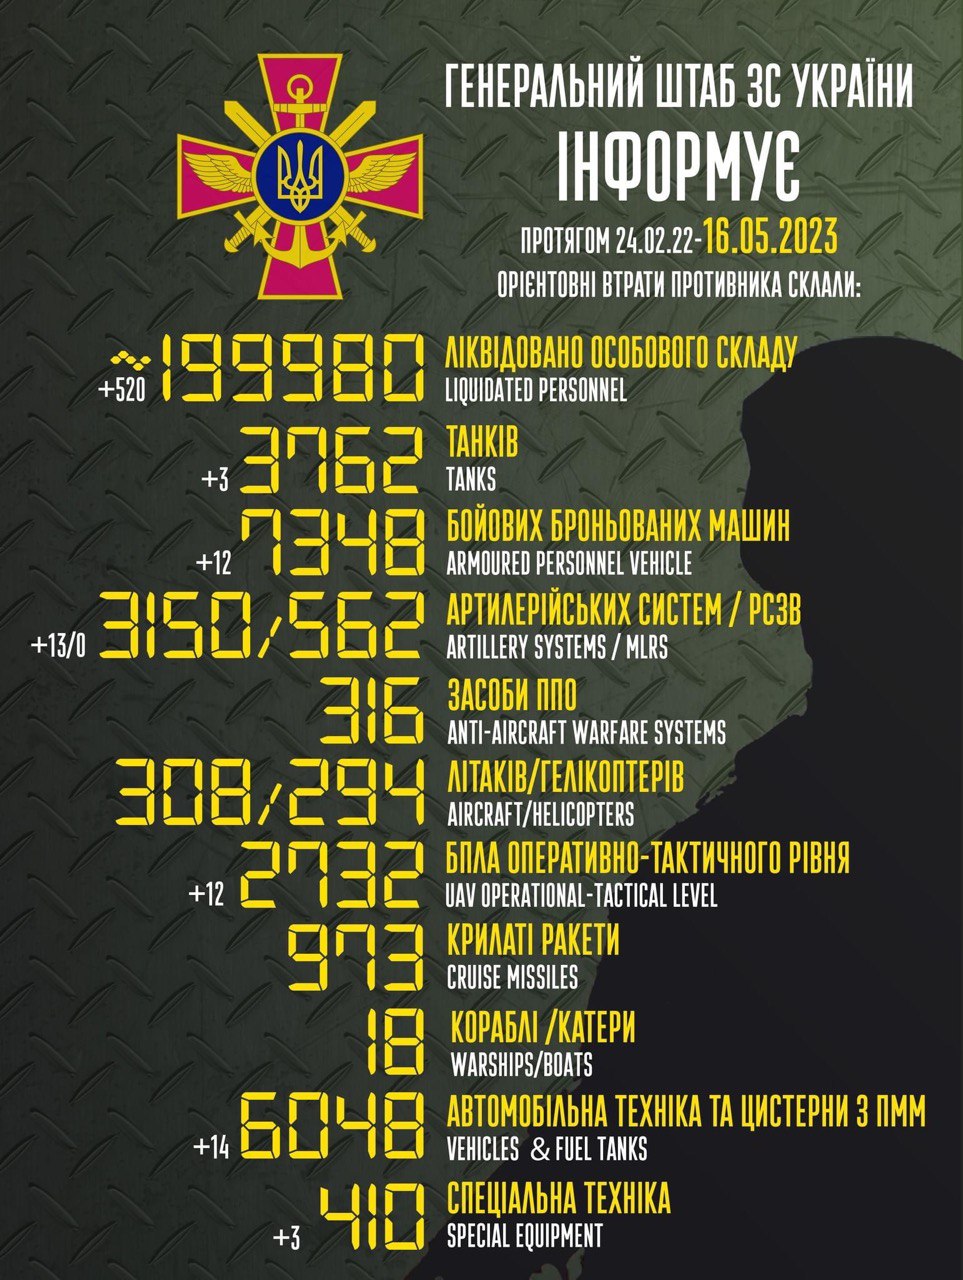 An example of a Russian casualty estimate as it appears on the Ukranian Ministry of Defense site